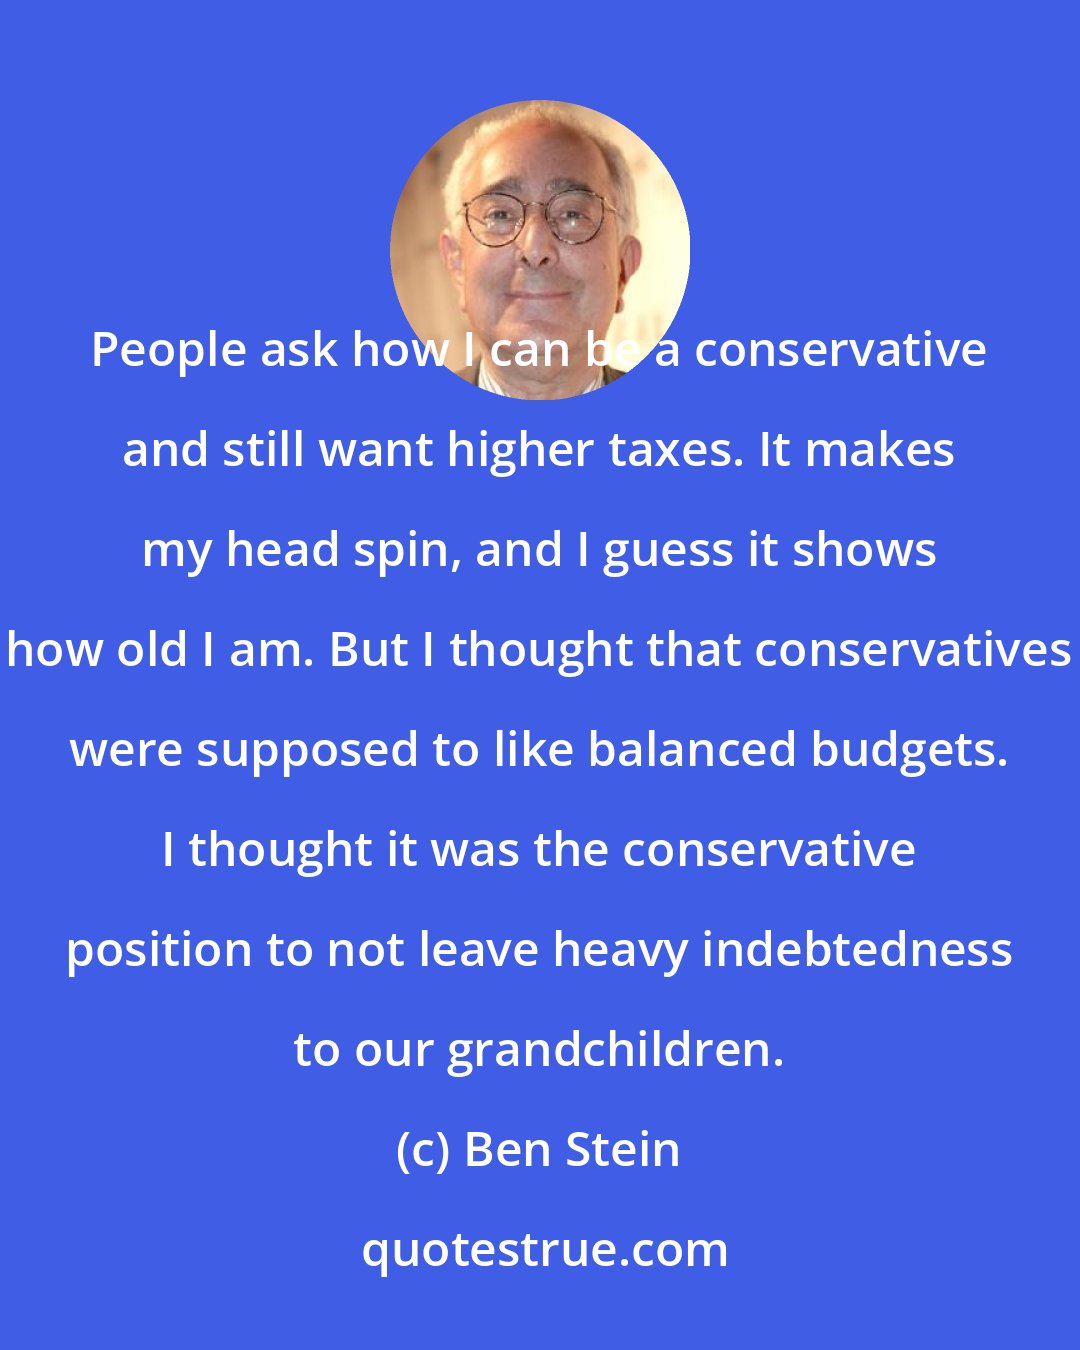 Ben Stein: People ask how I can be a conservative and still want higher taxes. It makes my head spin, and I guess it shows how old I am. But I thought that conservatives were supposed to like balanced budgets. I thought it was the conservative position to not leave heavy indebtedness to our grandchildren.